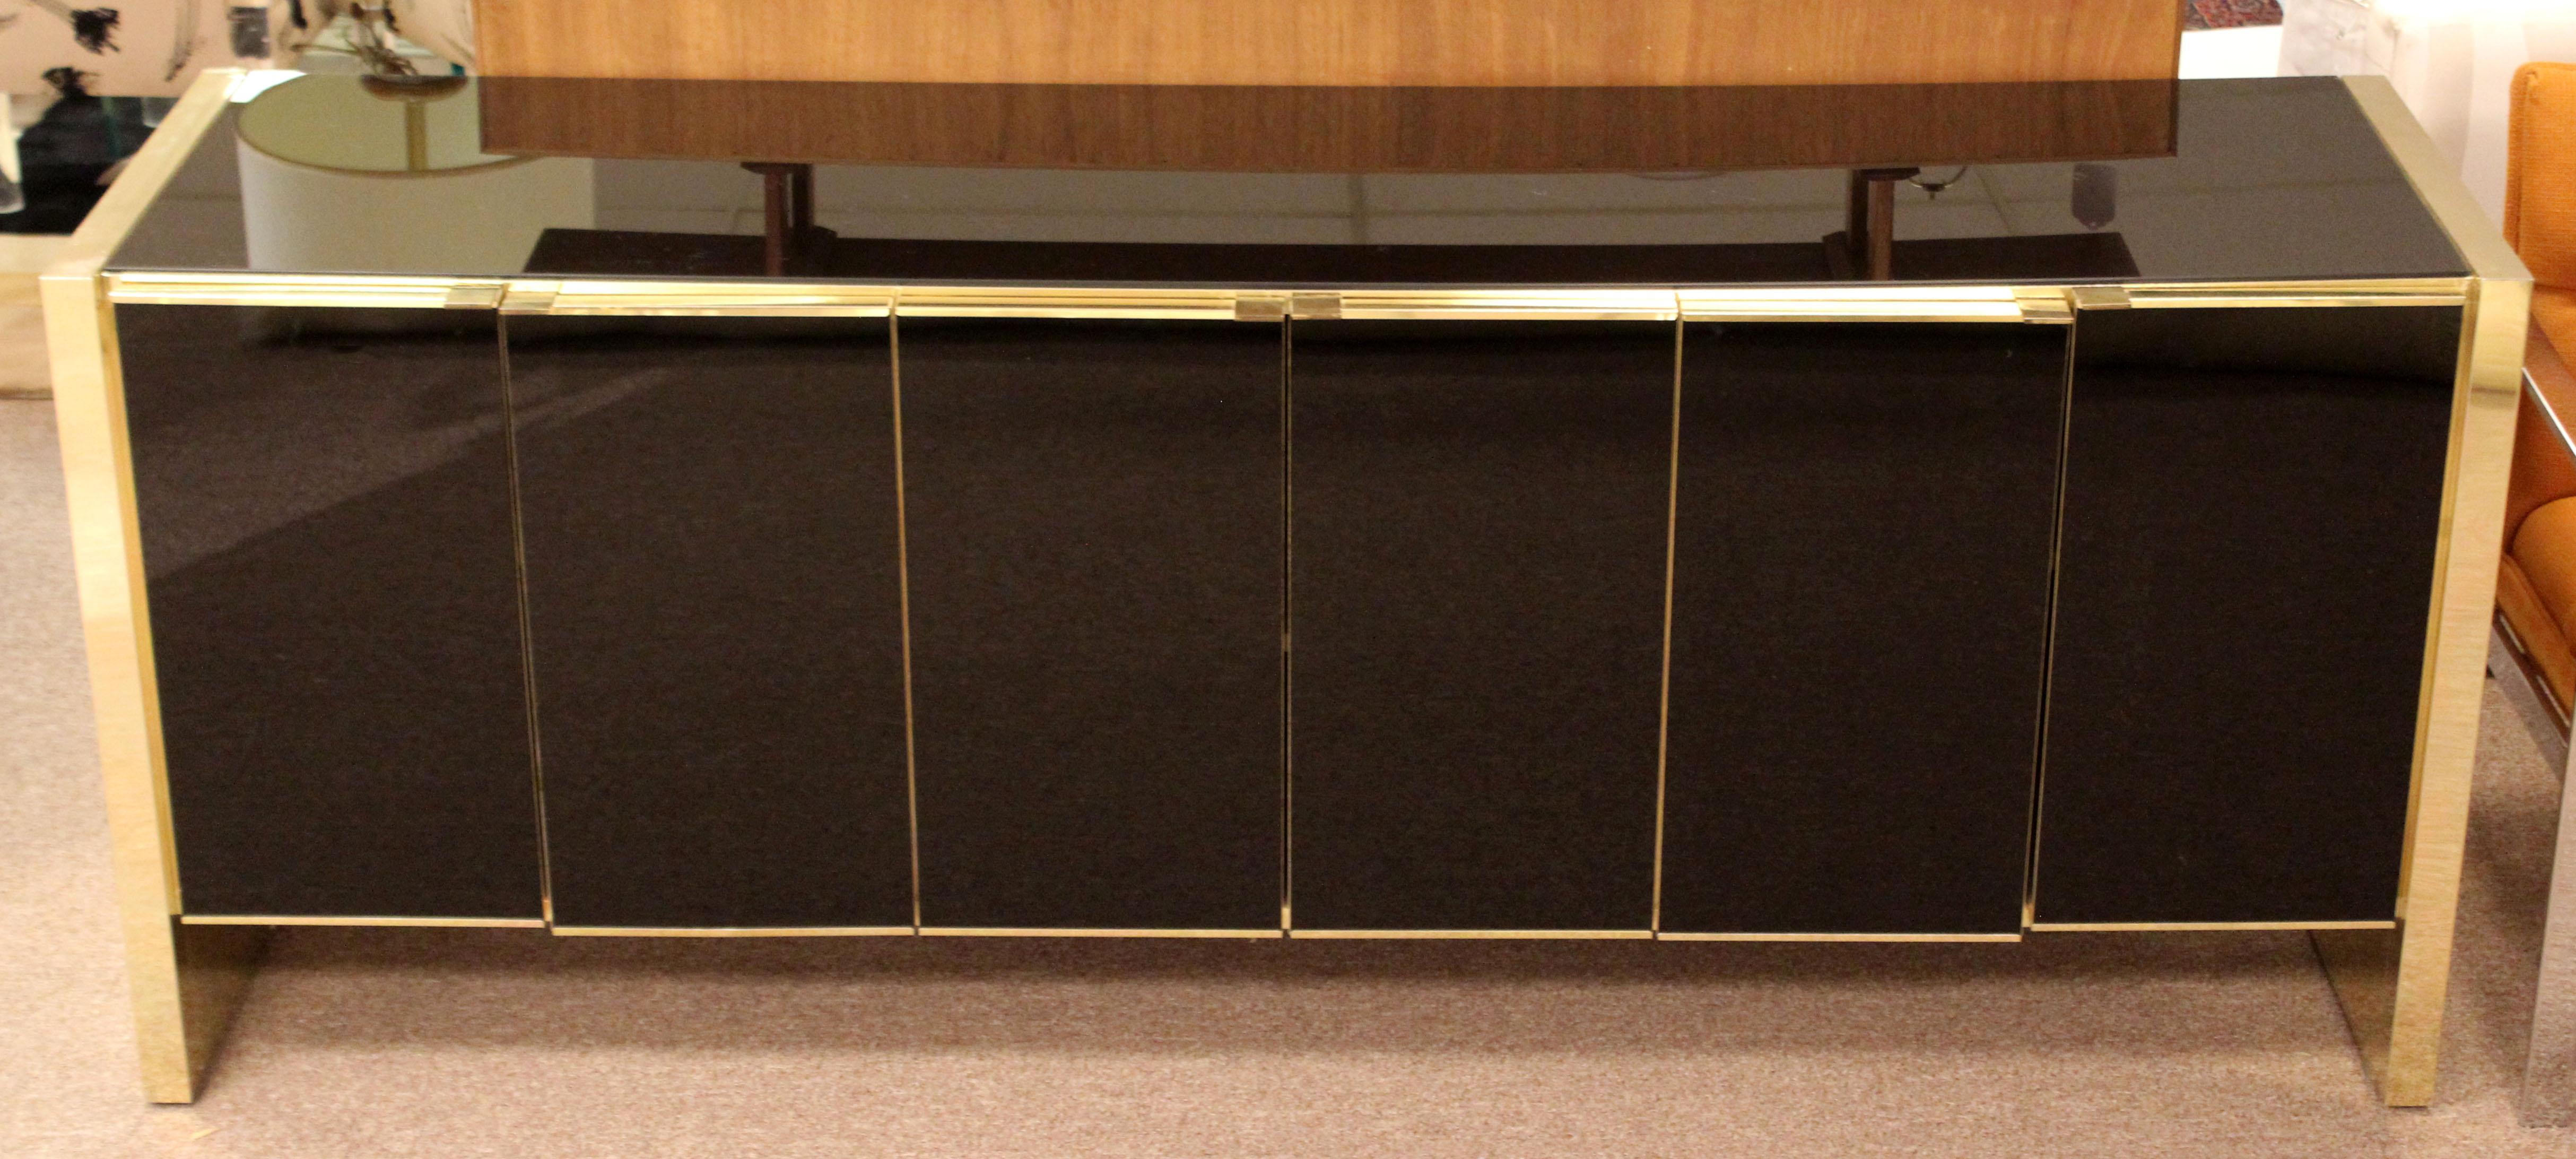 For your consideration is a fabulously chic credenza sideboard, with smoked mirrored top and doors and brass trim, by Ello Furniture, circa 1970s. In very good condition. The dimensions are 75.5